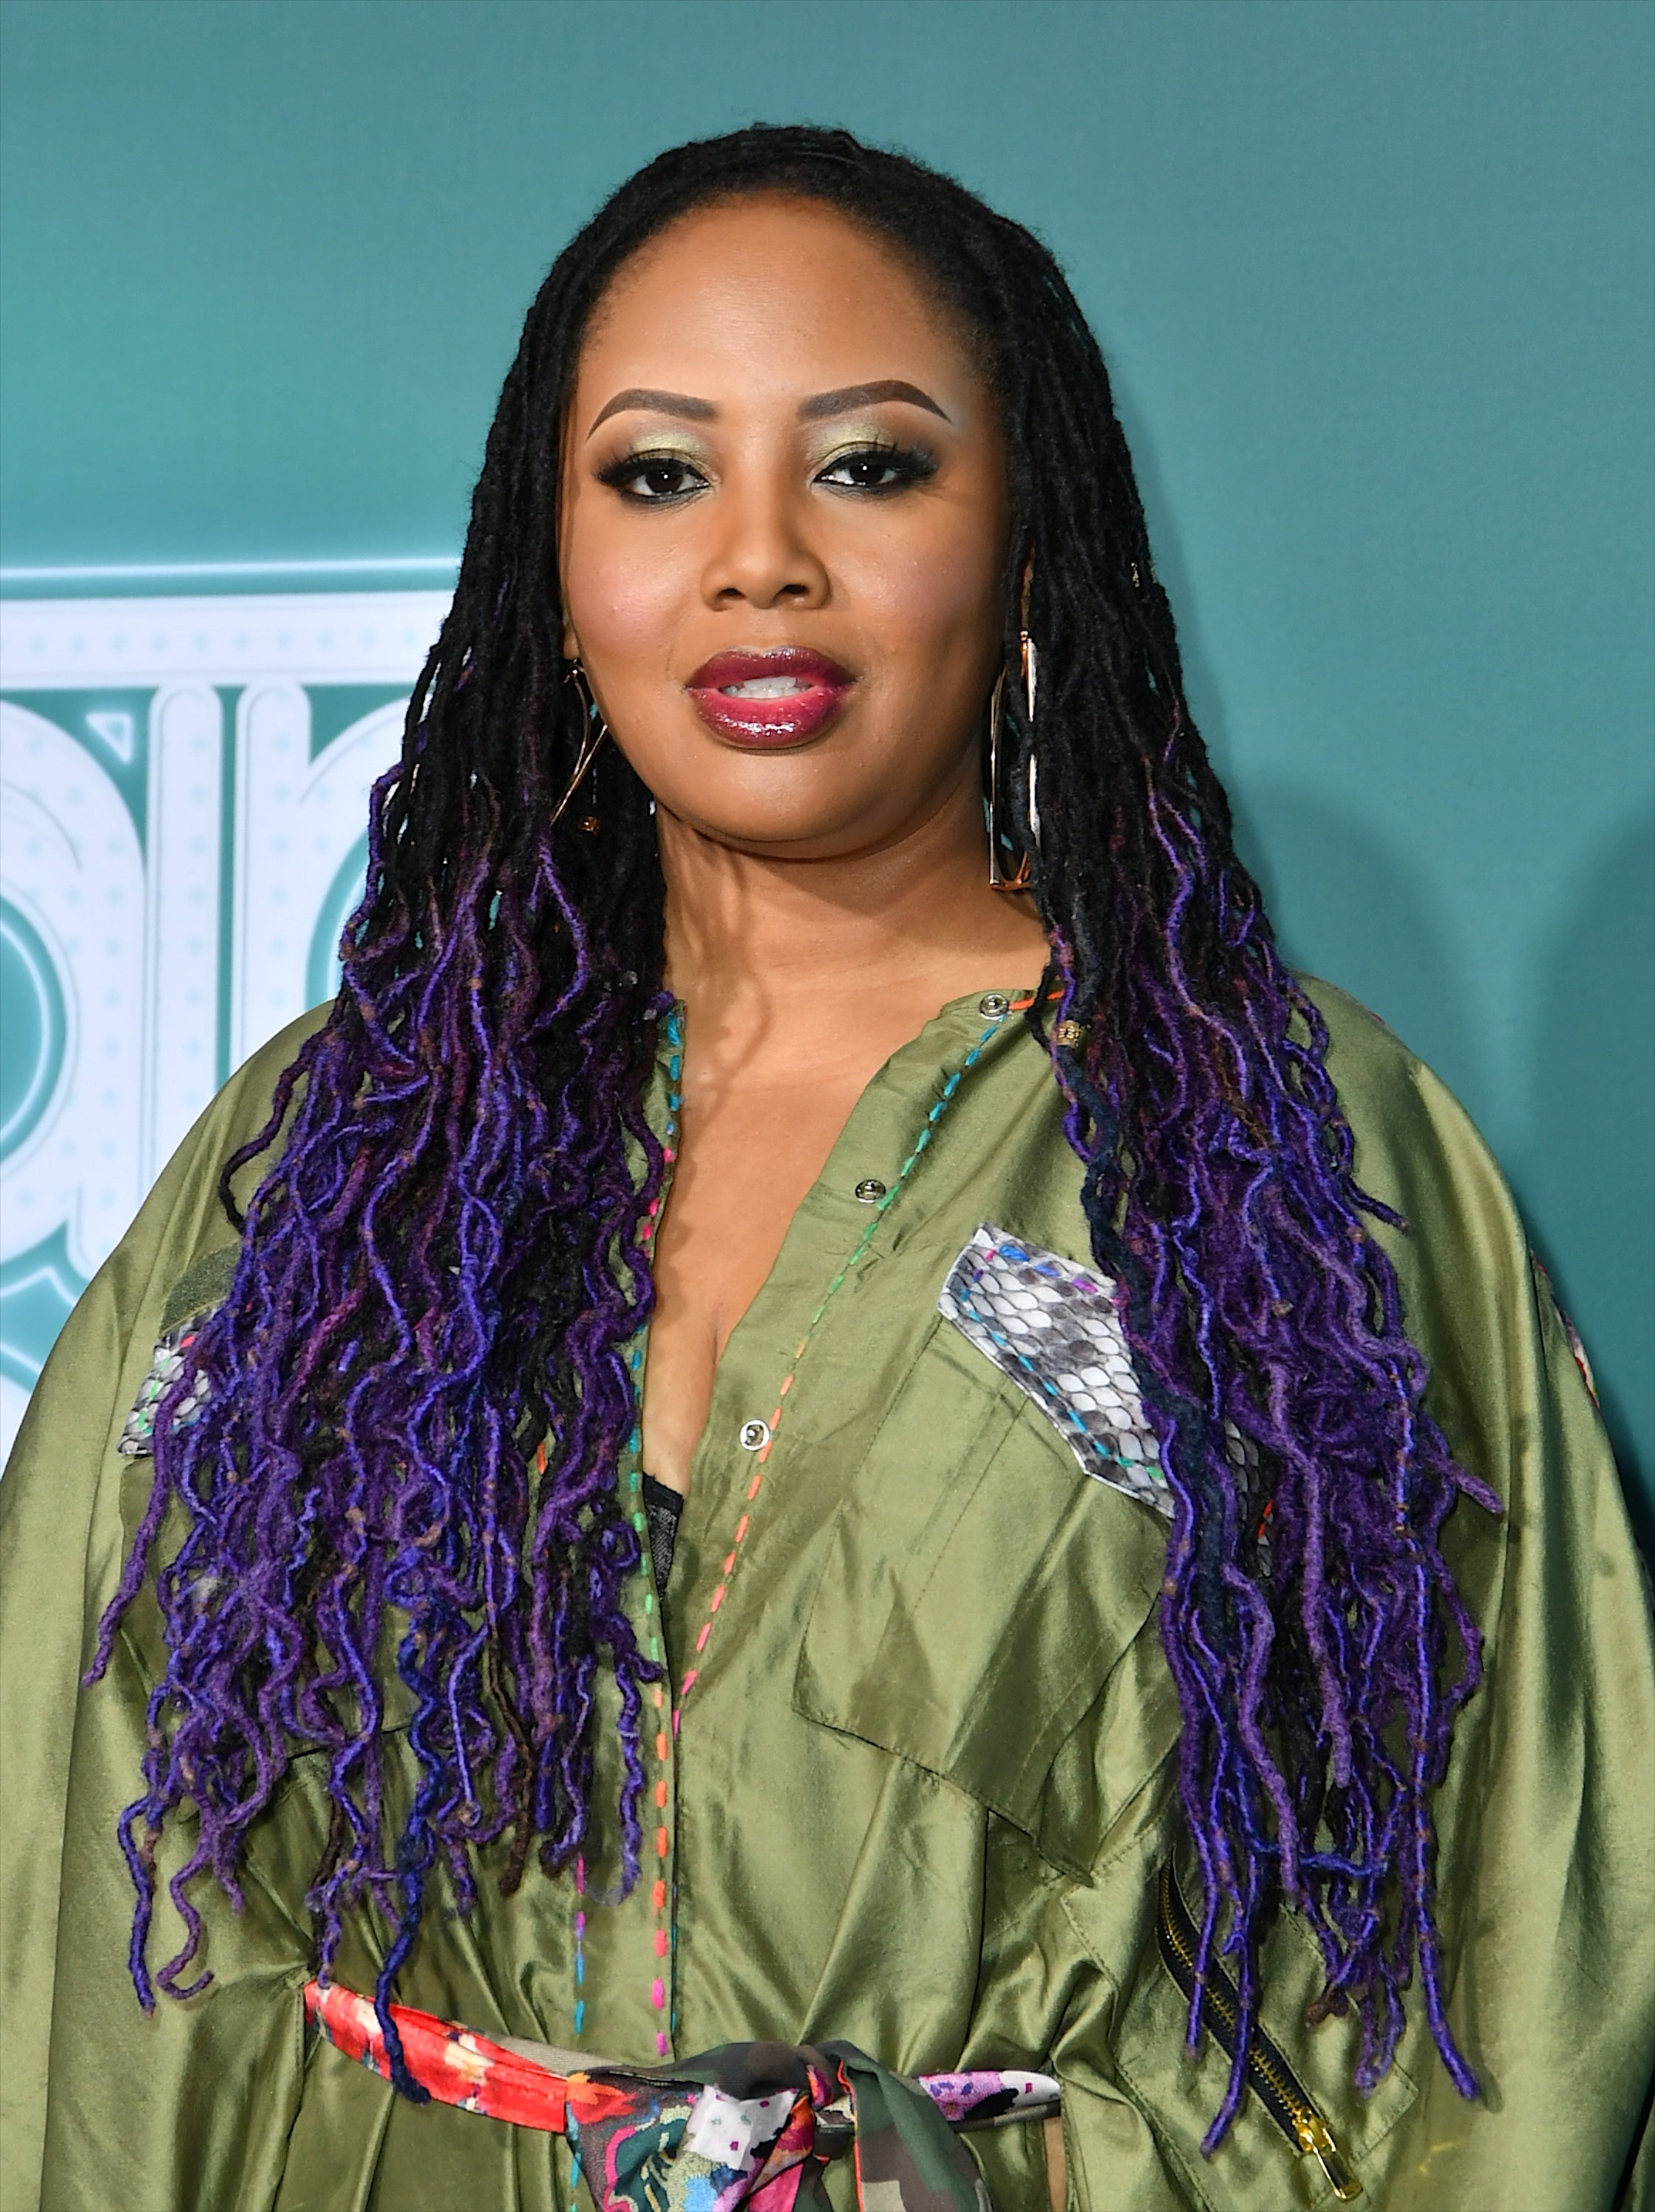 These 10 Hollywood Women Have The Loc Game On Lock
